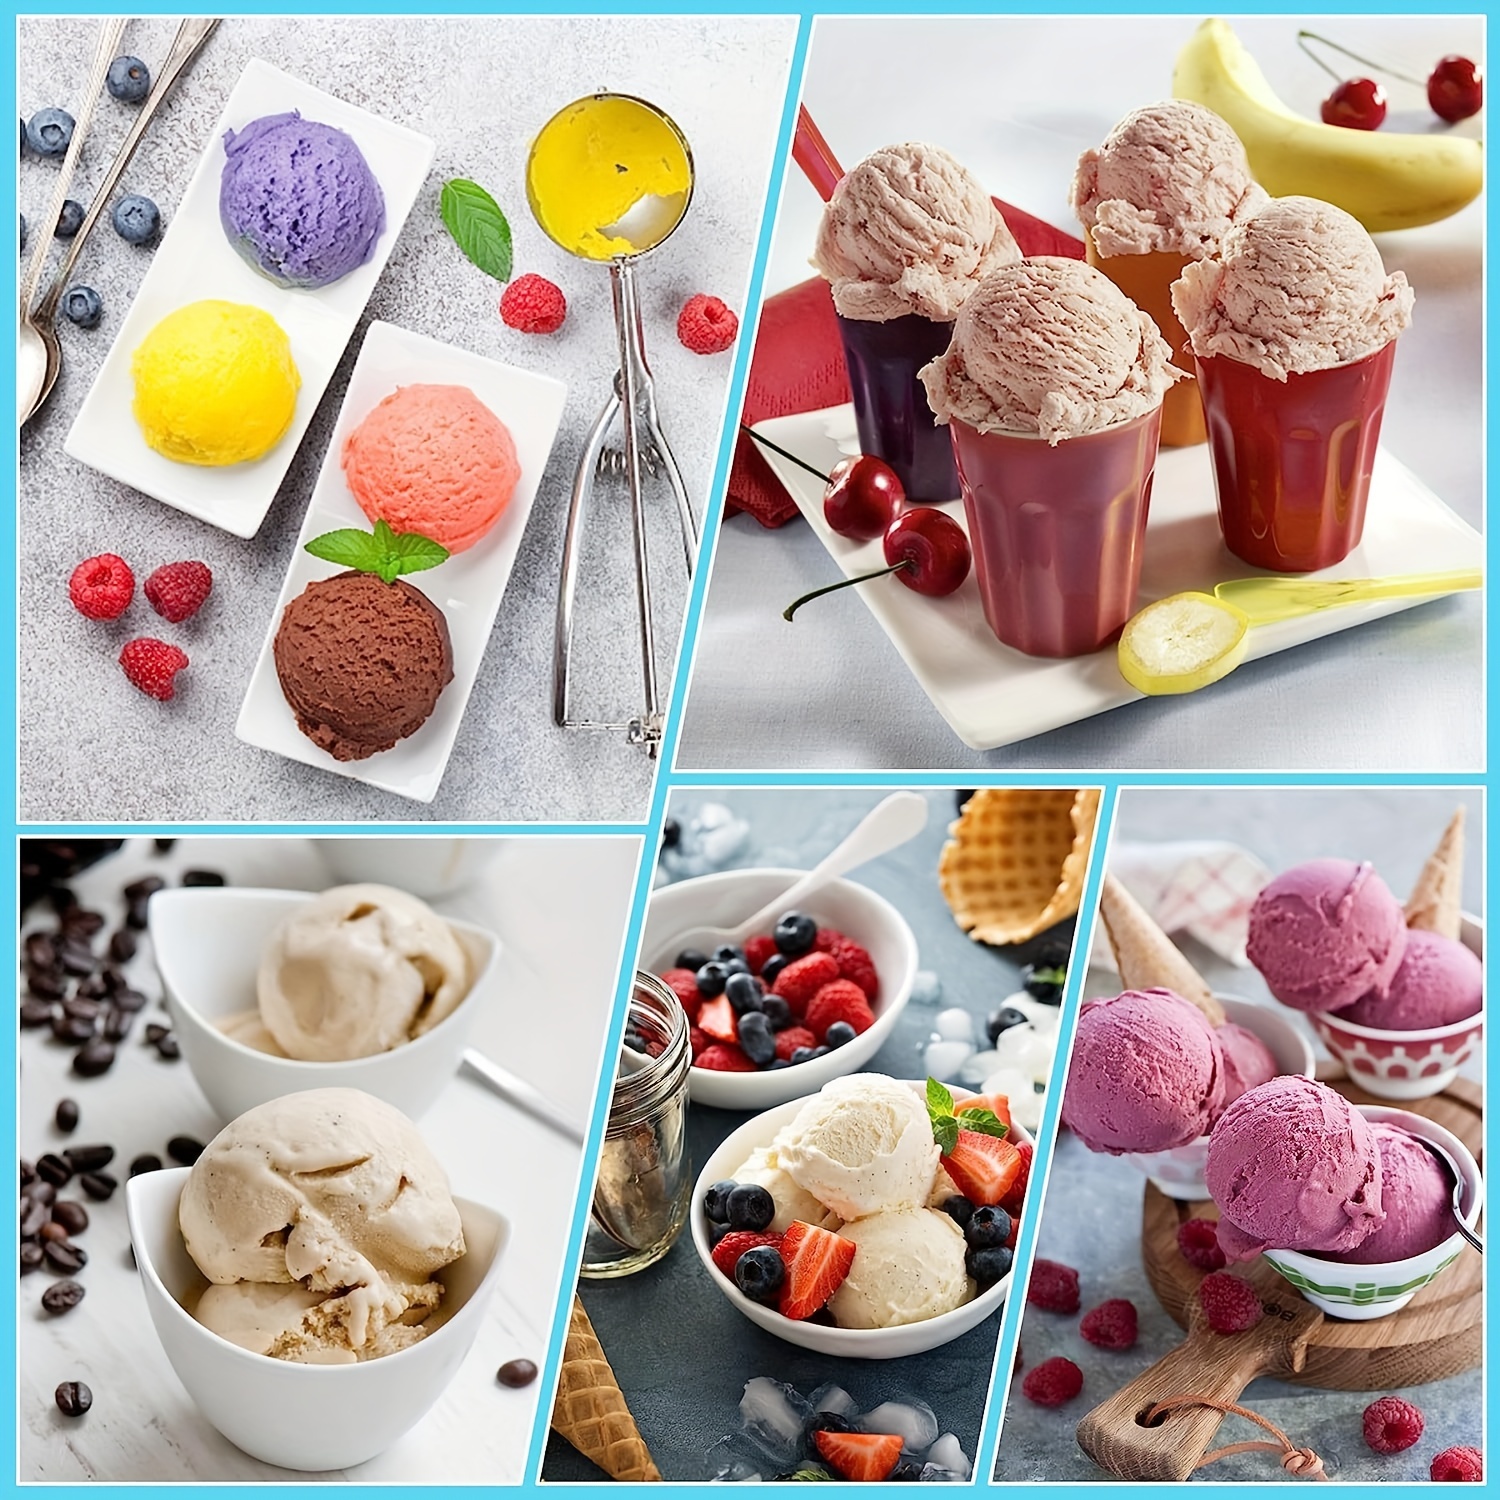 1pcs Ice Cream Containers With Lids Replacements For Ninja Creami Pints,  Ice Cream Pints Cup Safe Leakproof